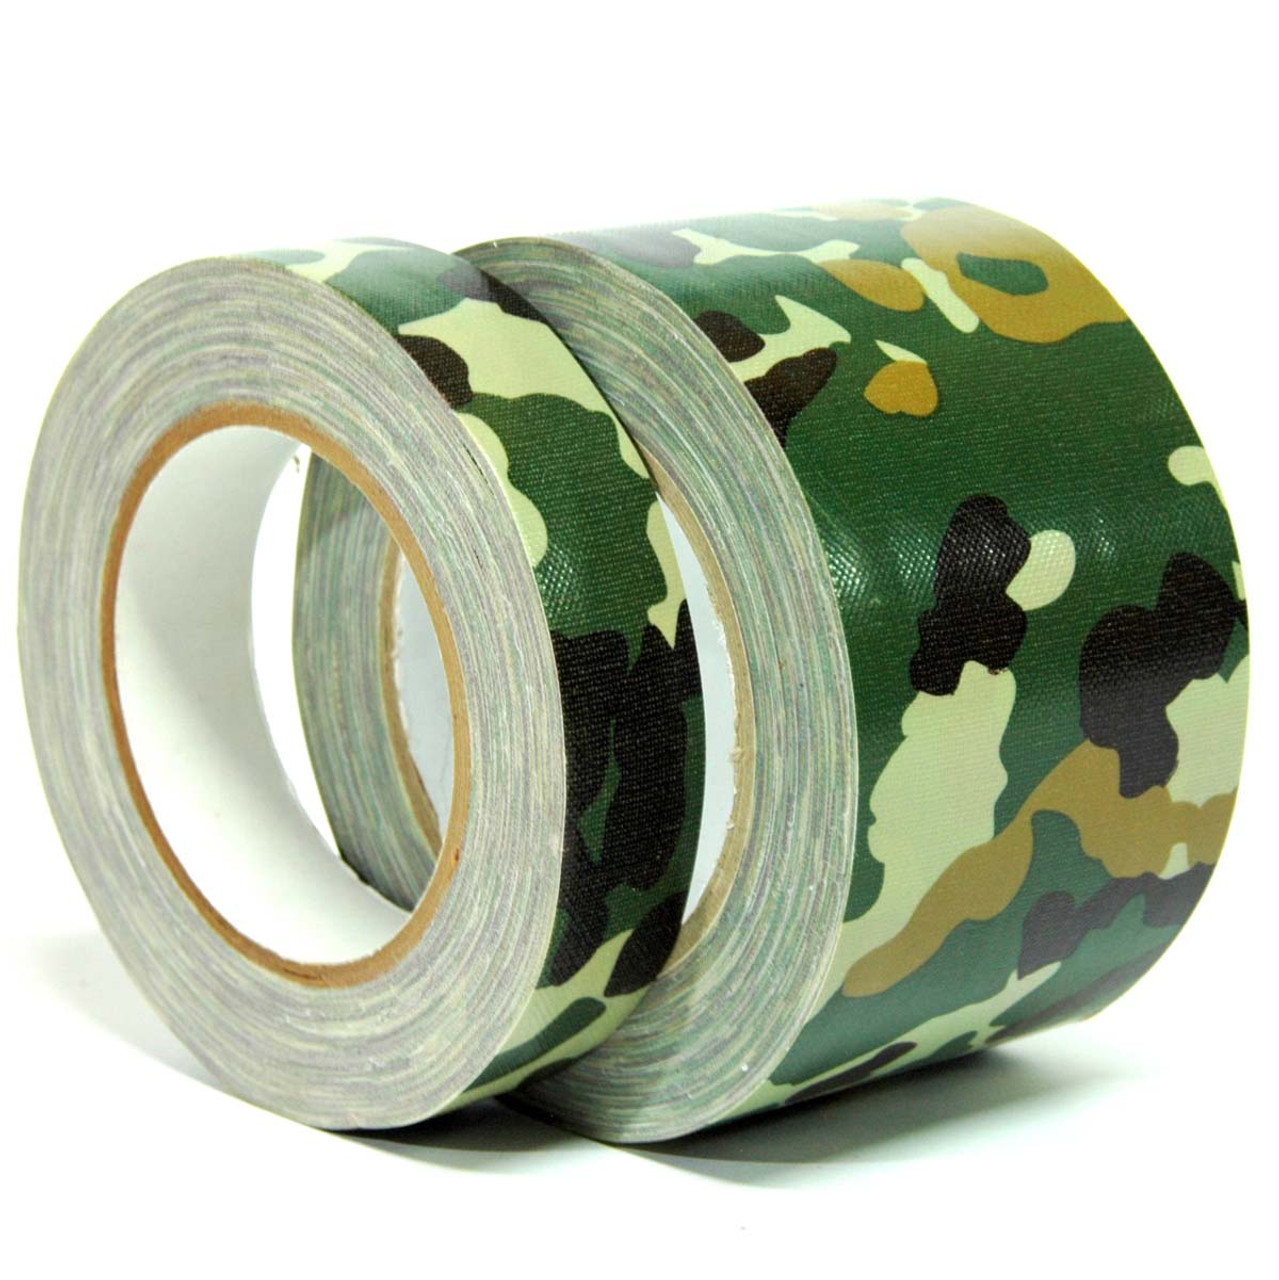 Camo duct tape at Tape Jungle.